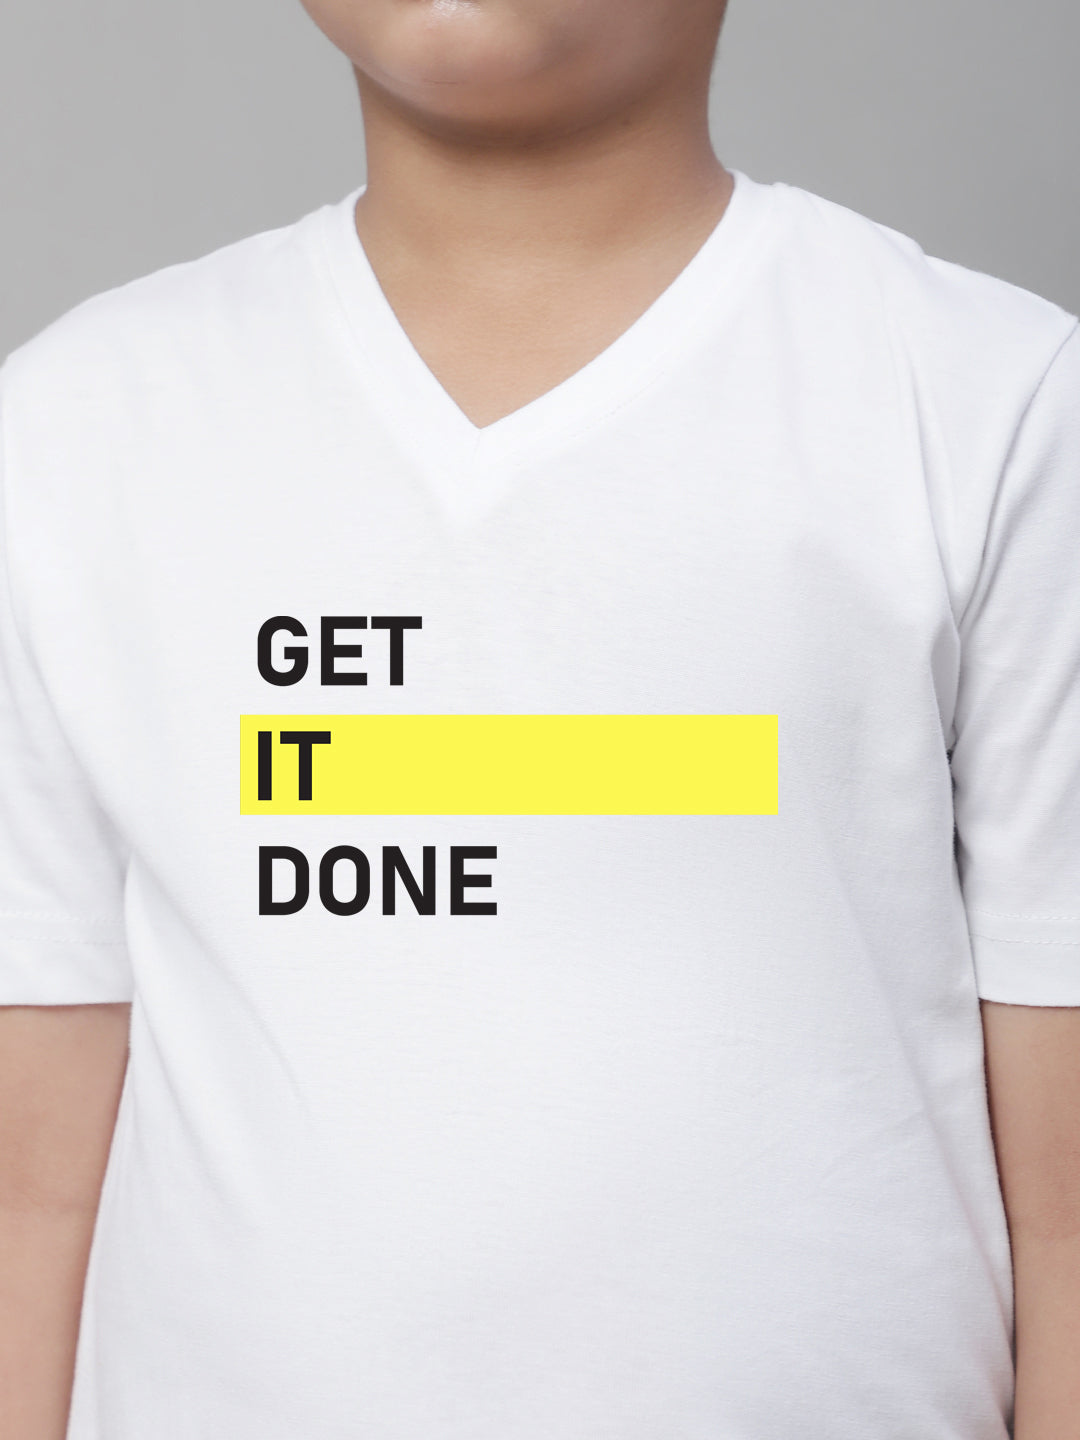 Boys Get It Done Half Sleeves Printed T-Shirt - Friskers